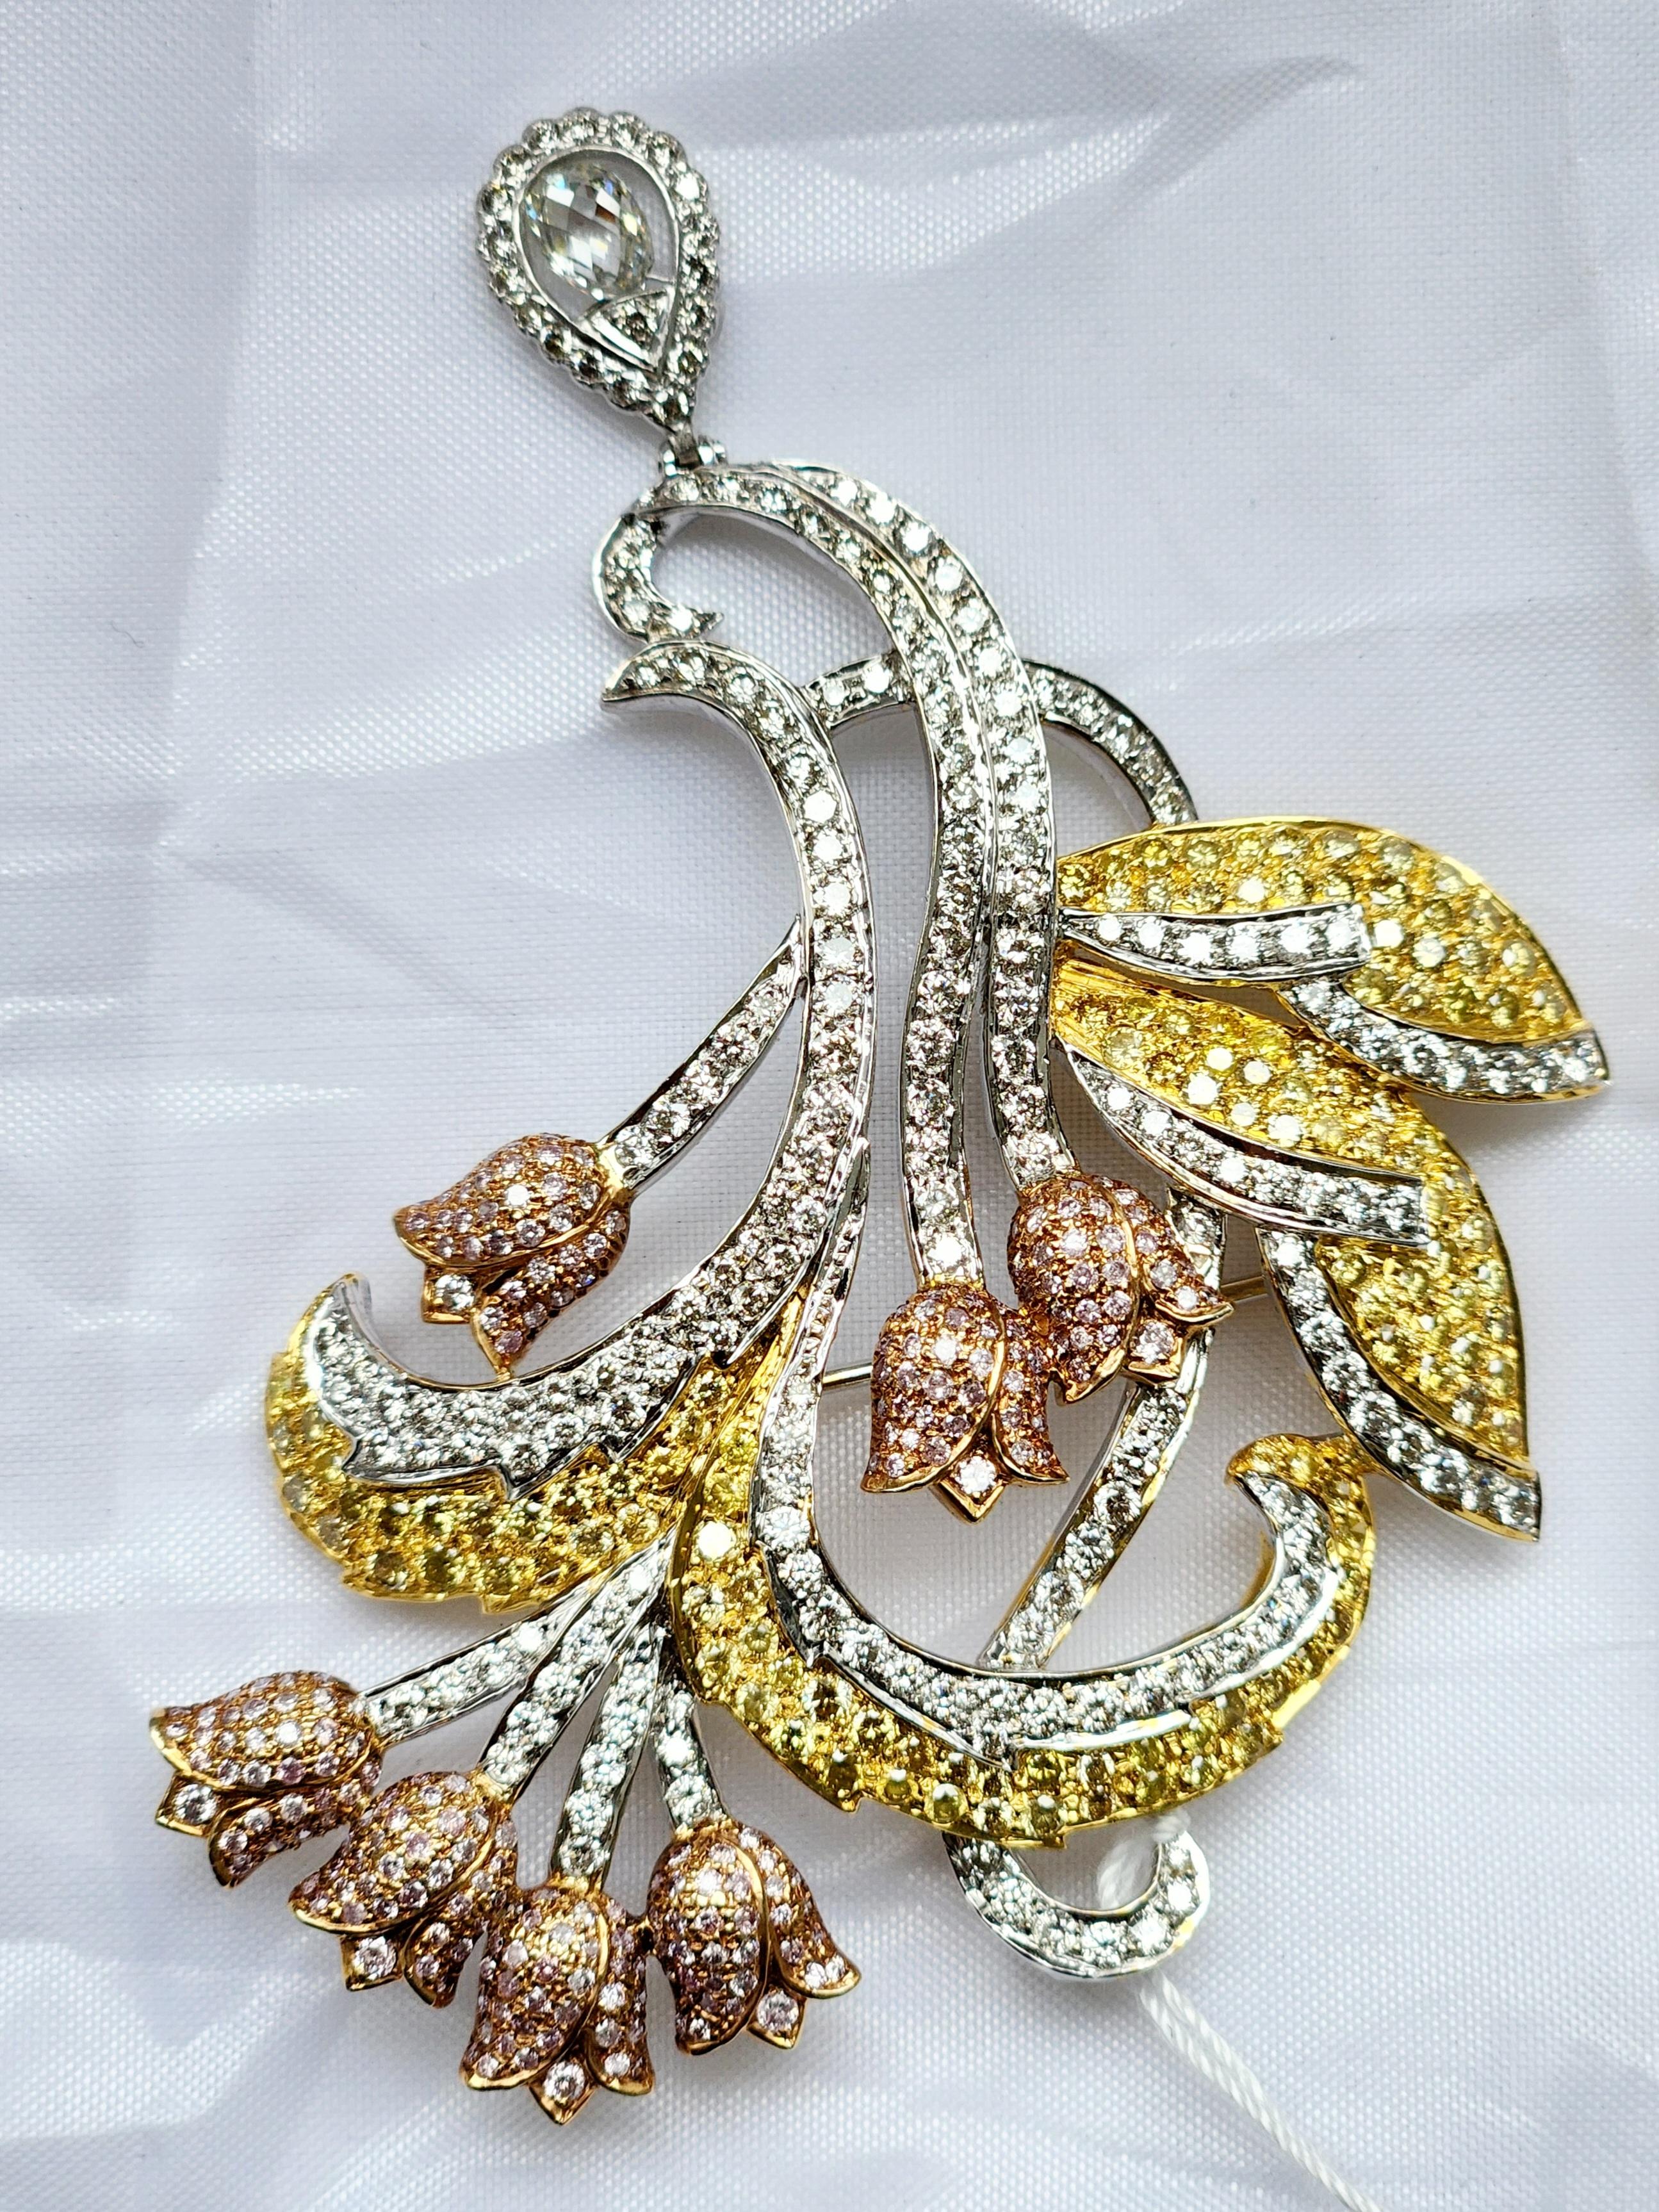 Presenting the Antique Flower Shaped Fancy Diamond Brooch Pendant, a stunning and unique piece of jewelry that exudes sophistication and elegance. The intricate design features delicate flowers crafted with pink melee diamonds, and sepals made of